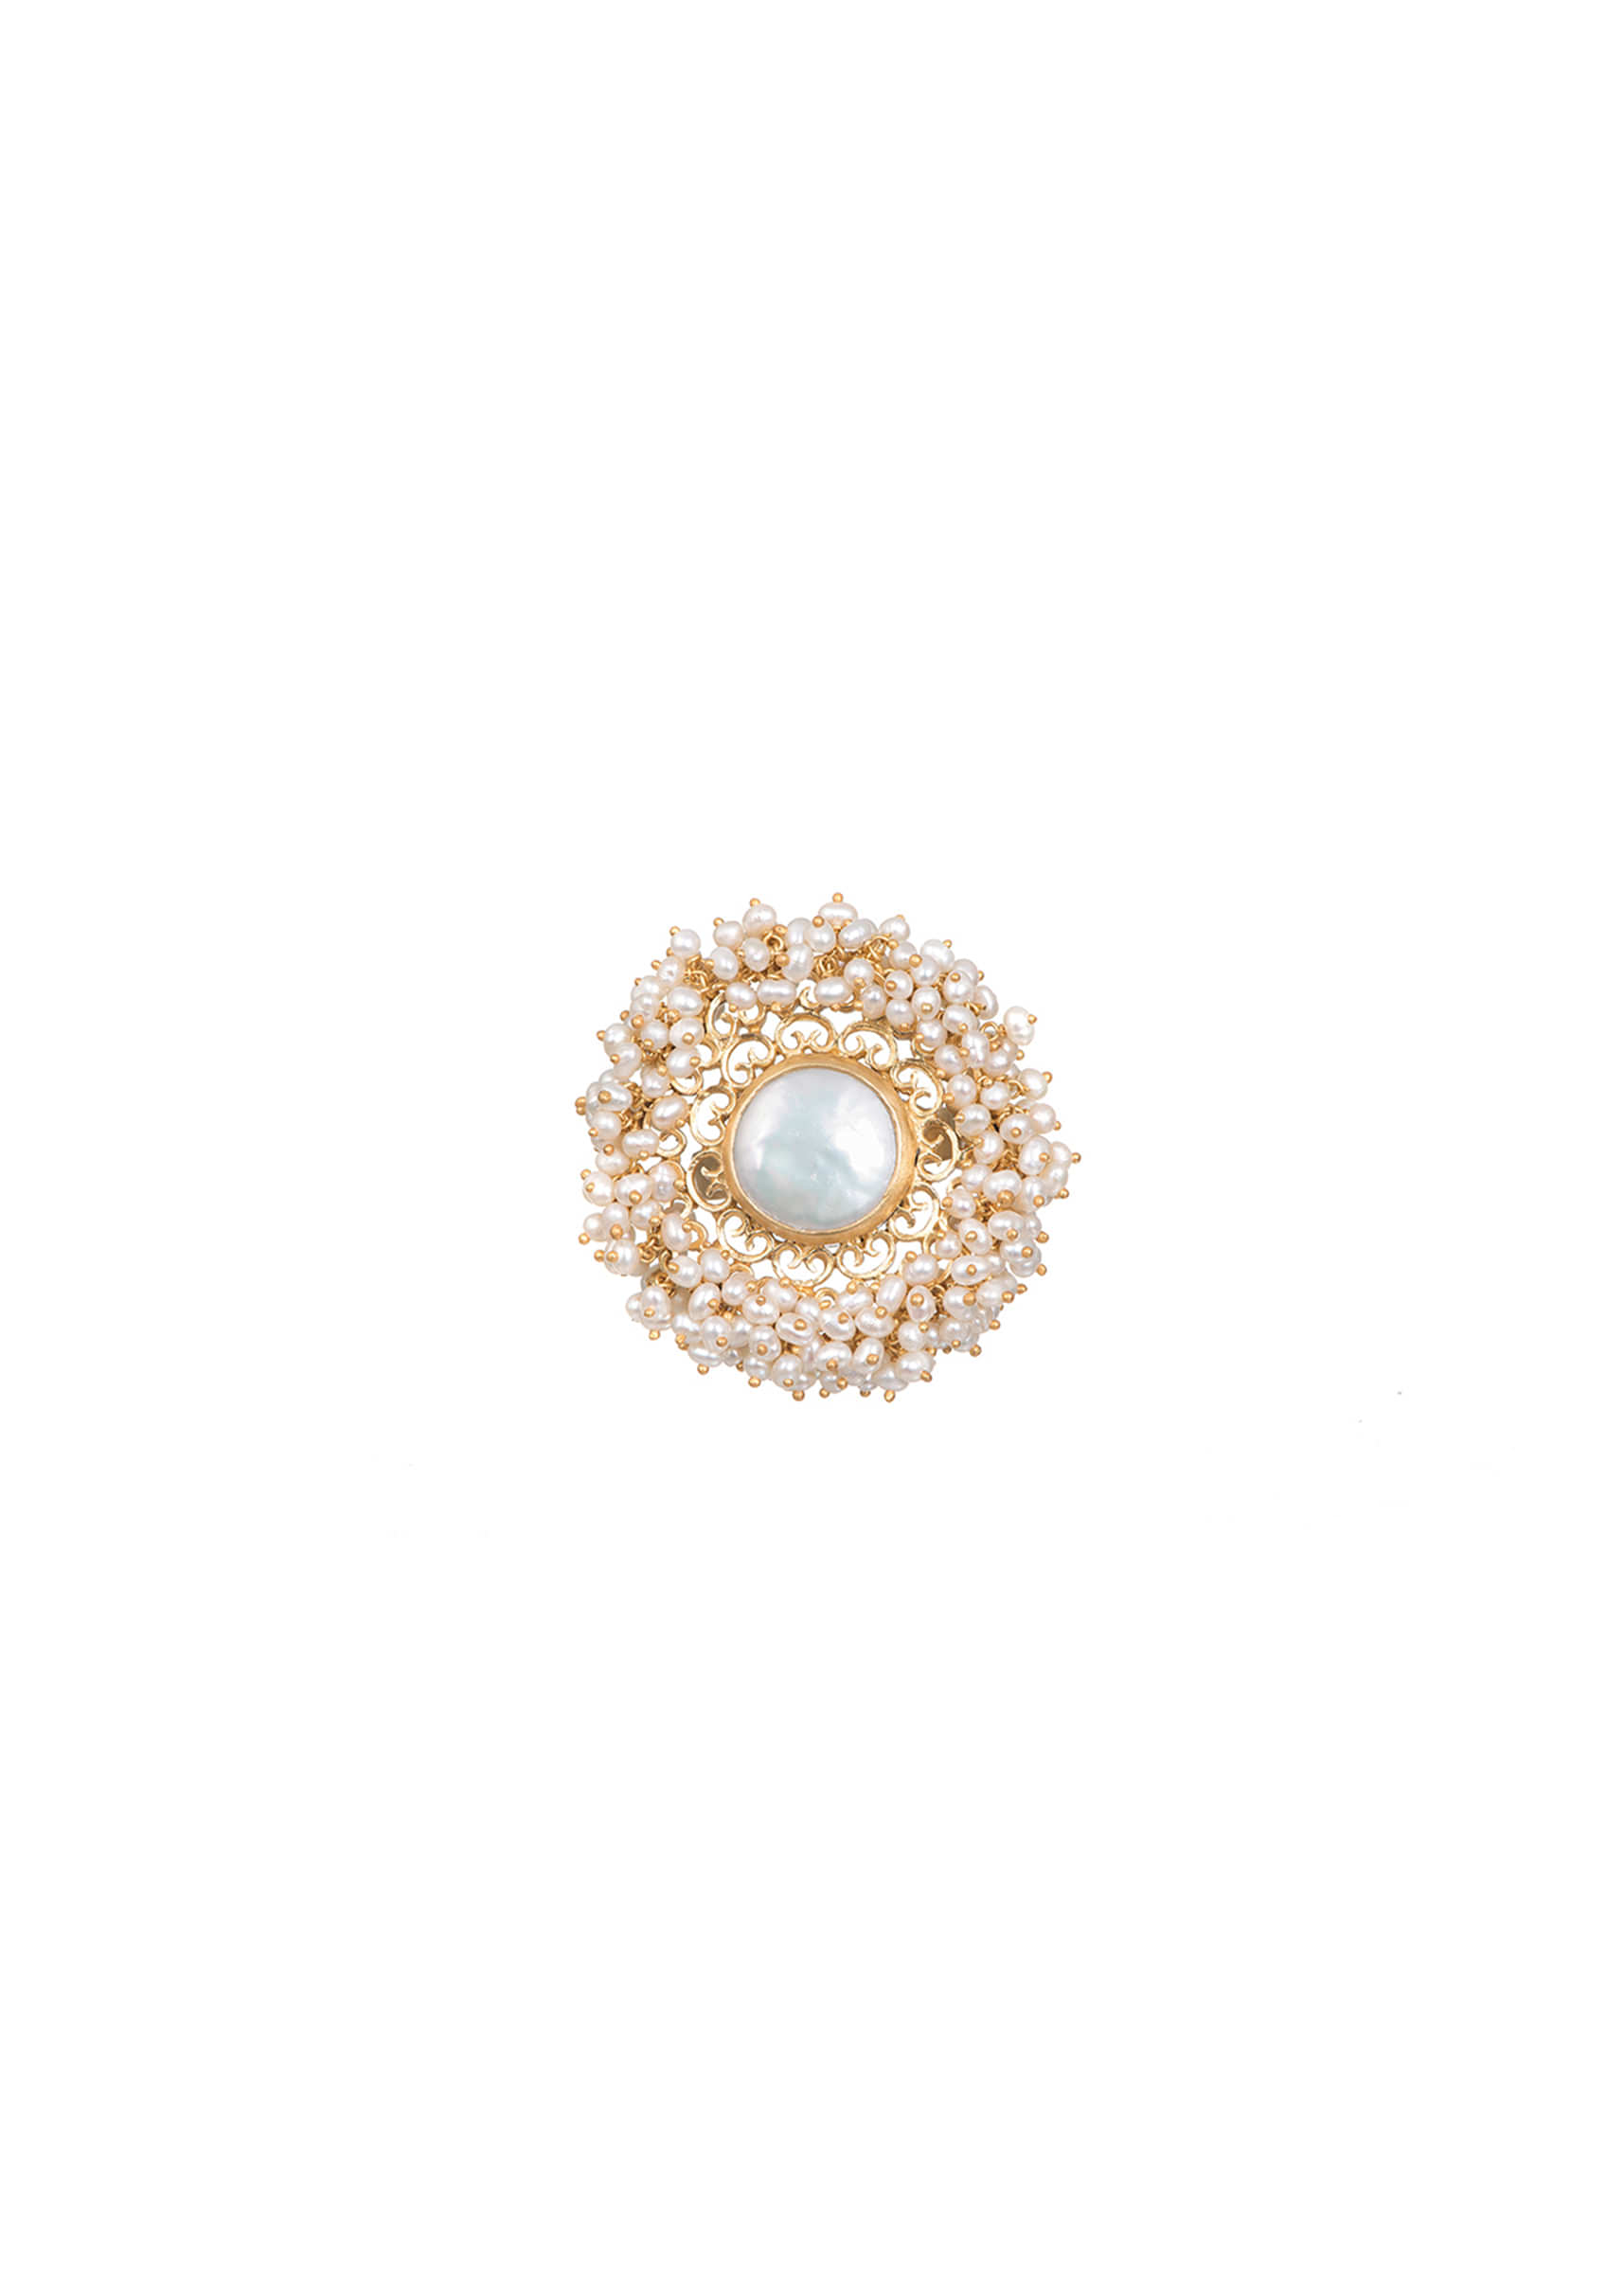 Gold Plated Chunky Ring With A Baroque Pearl Centre Lined With Tiny Pearl Beads By Zariin